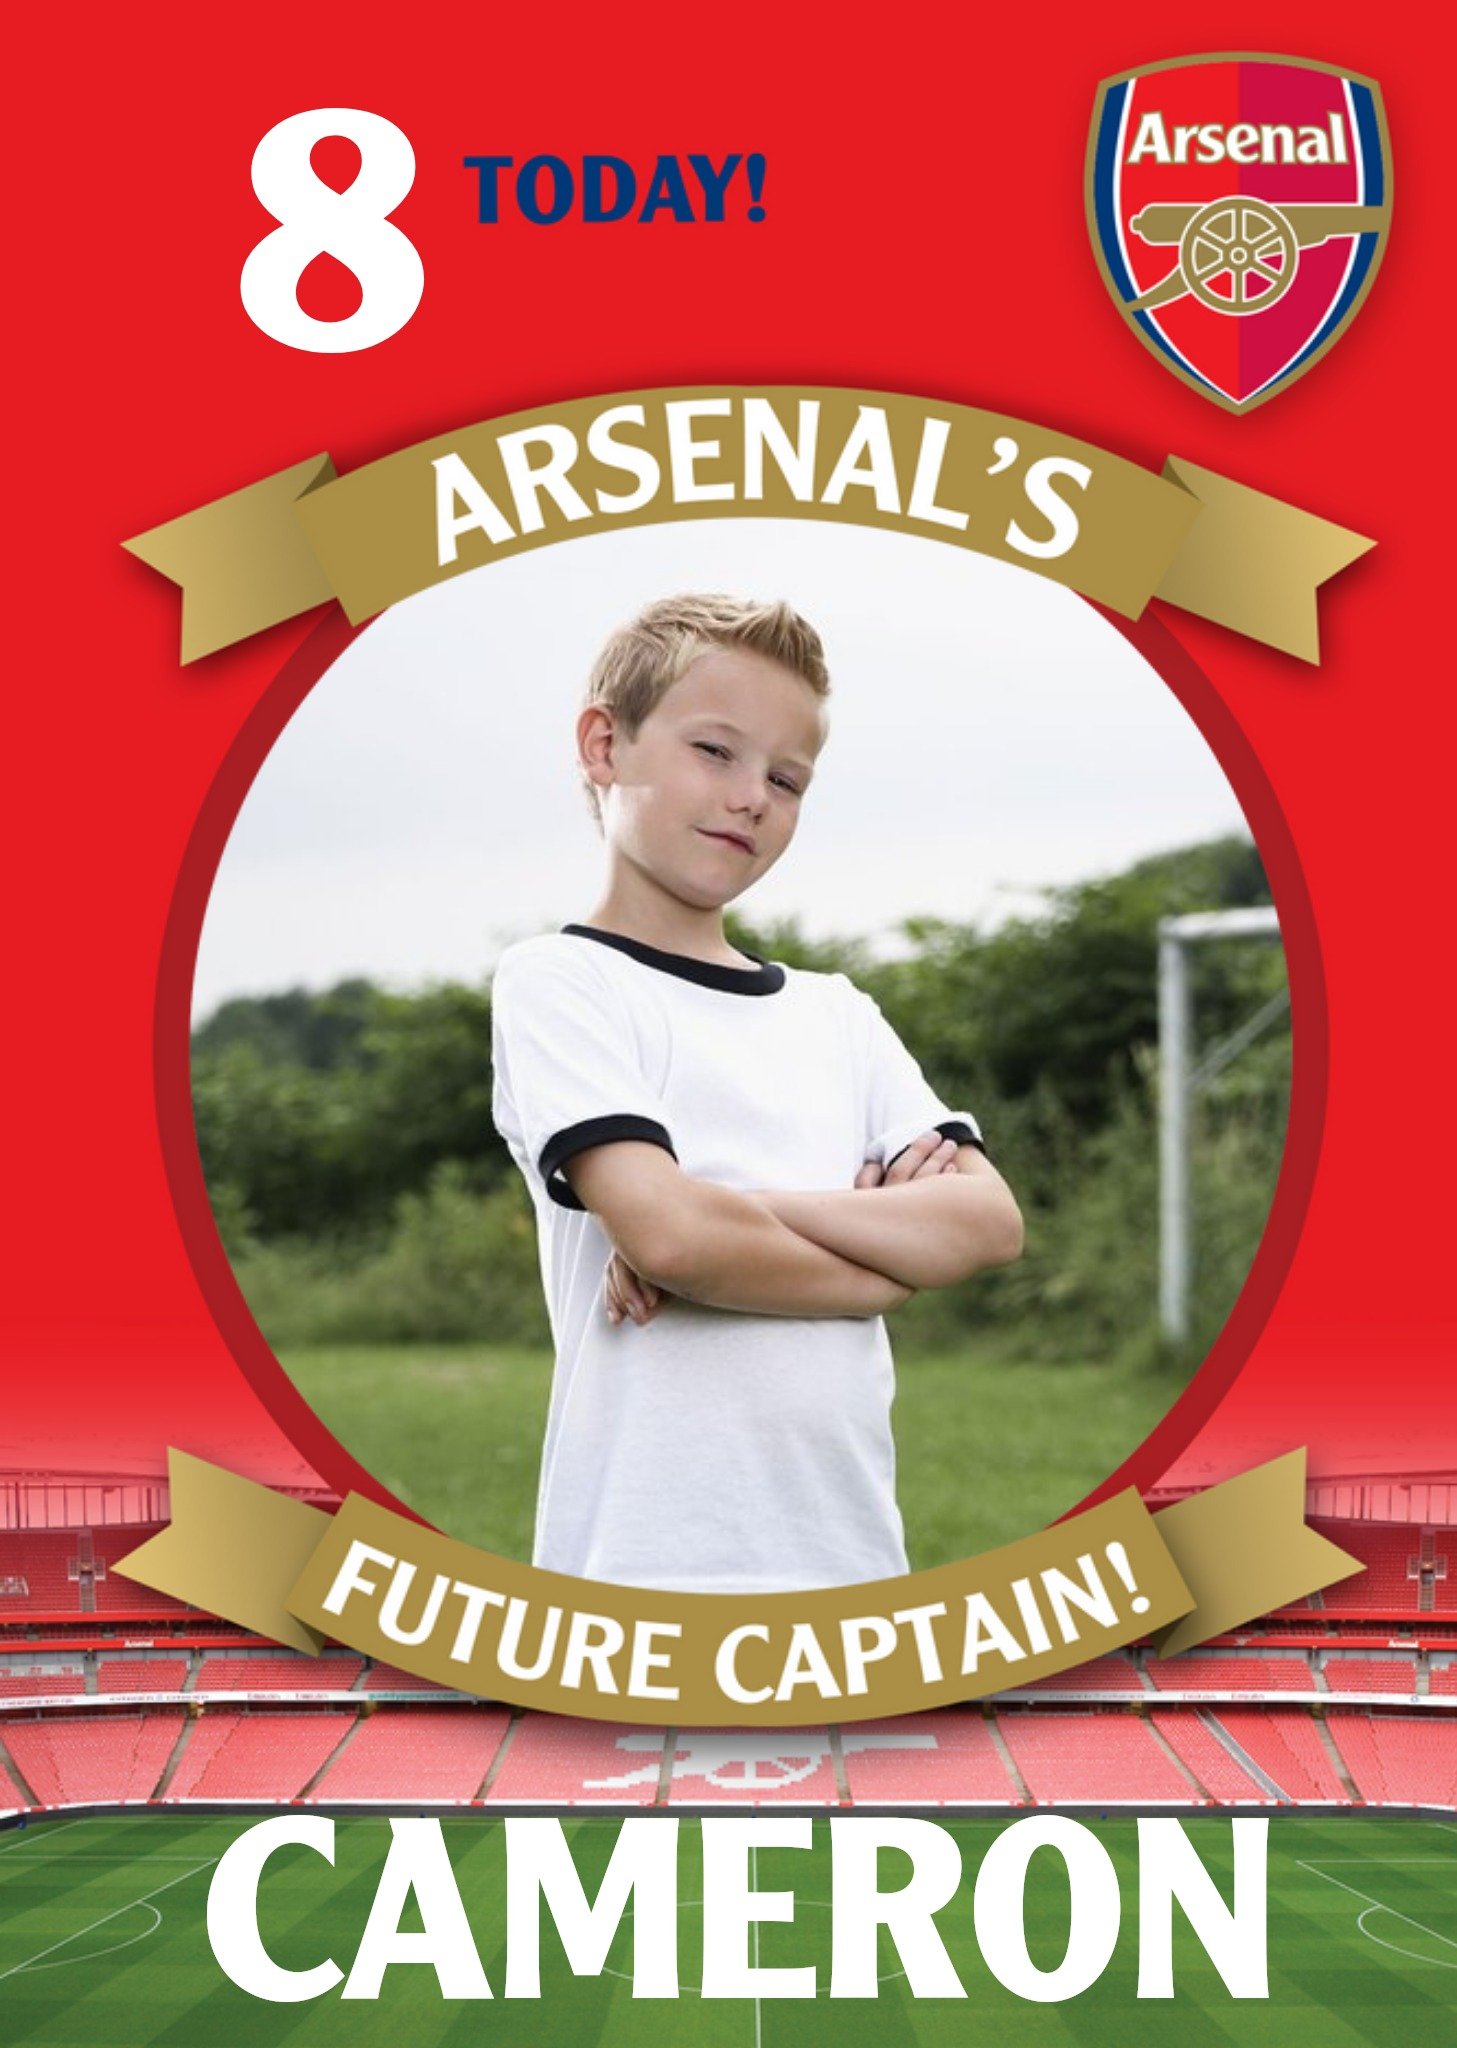 Arsenal Fc Birthday Card - 8 Today Arsenal's Future Captain, Large